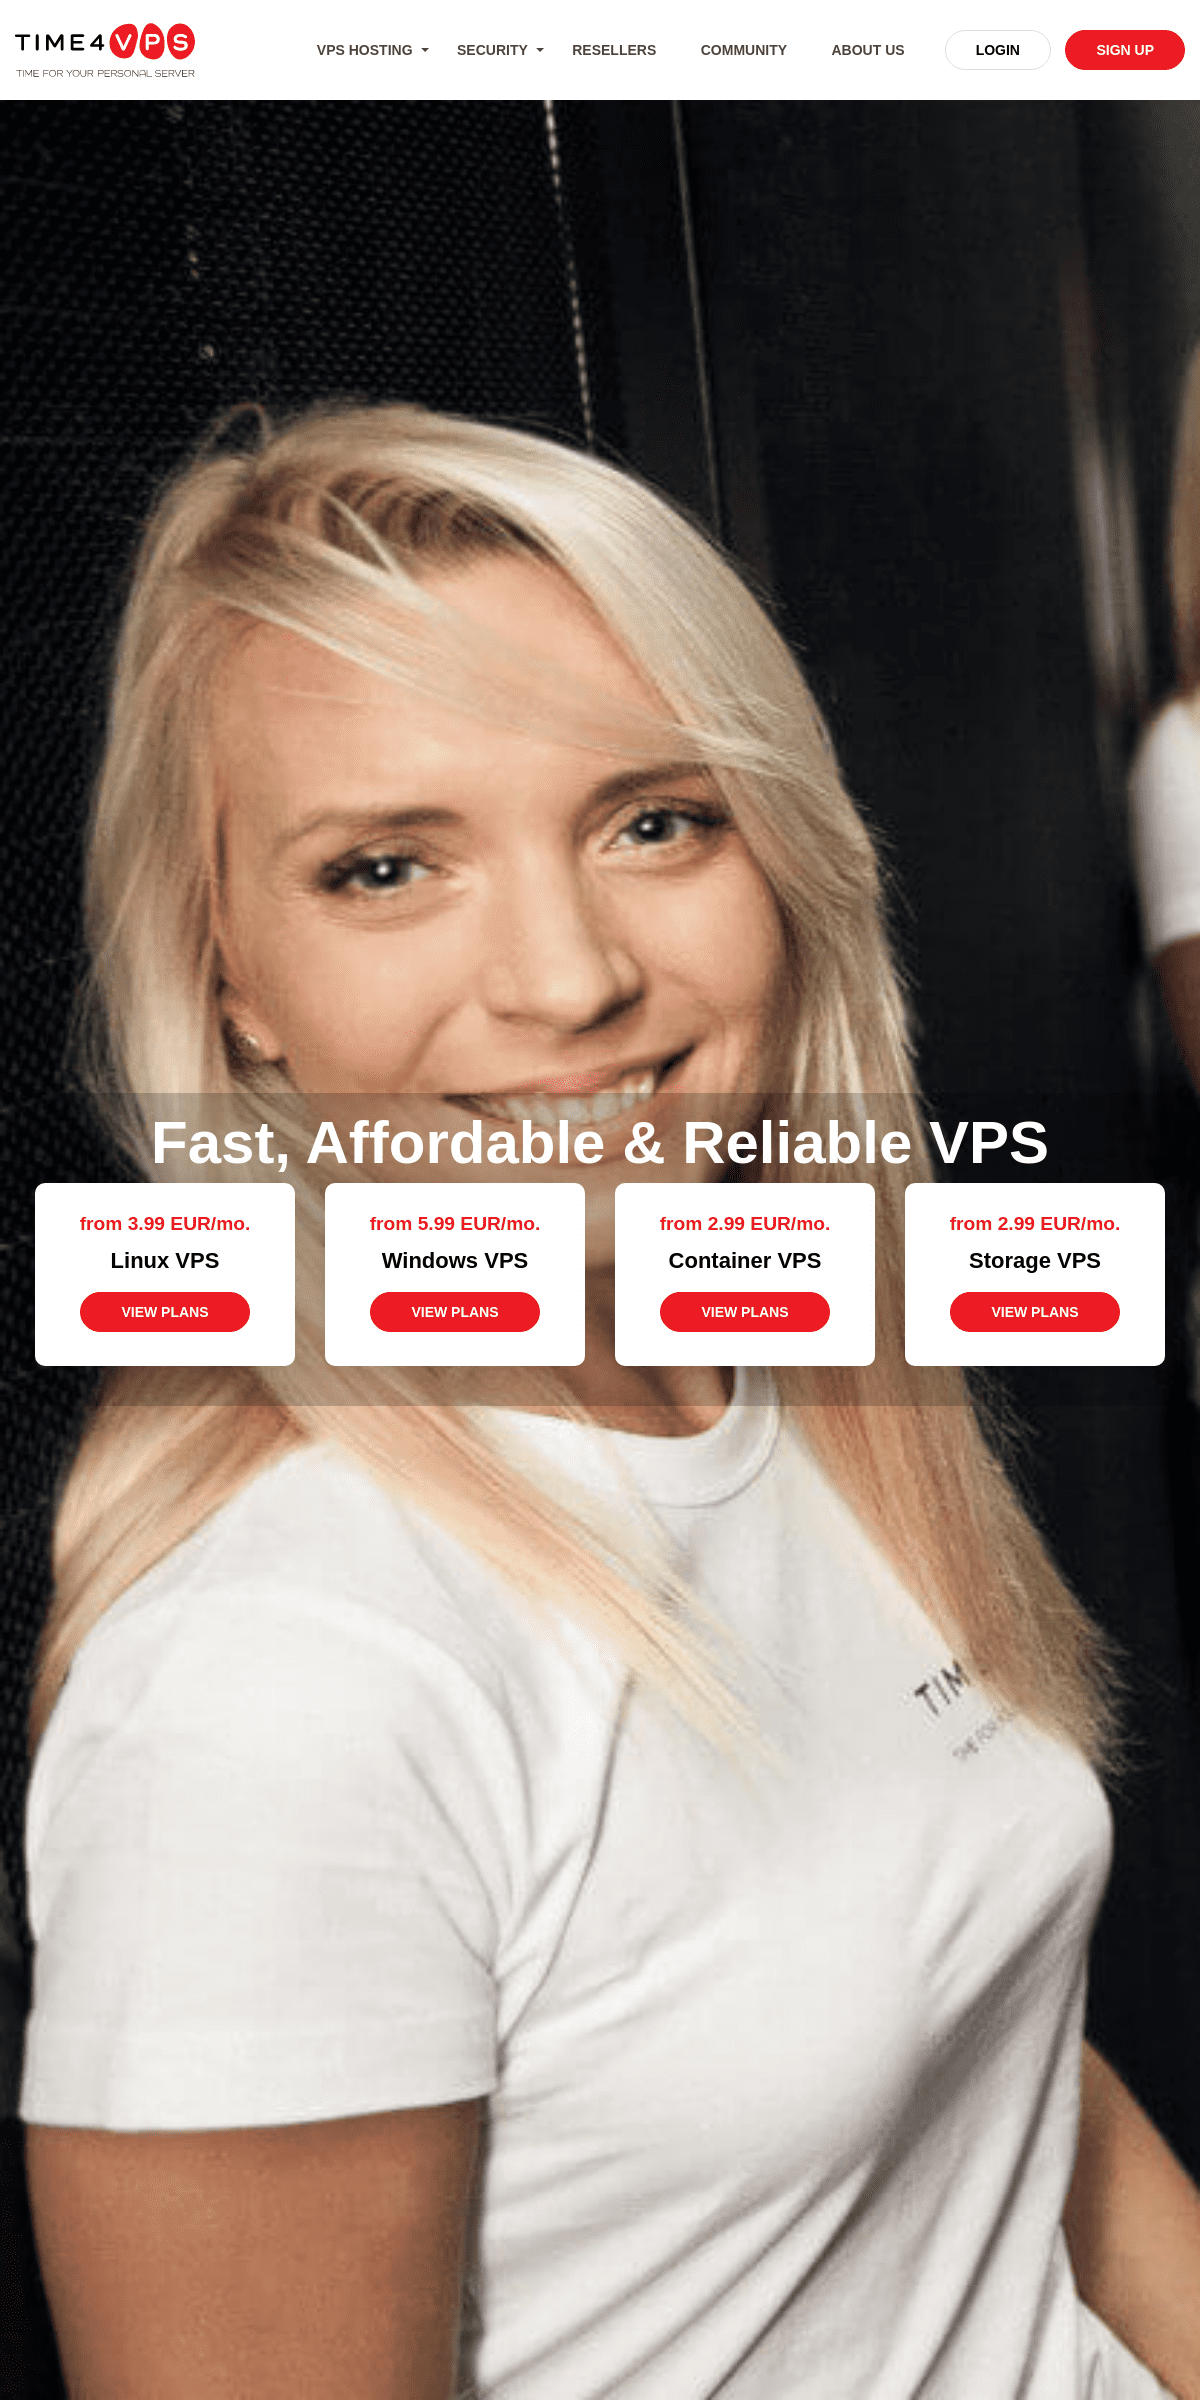 A complete backup of time4vps.com